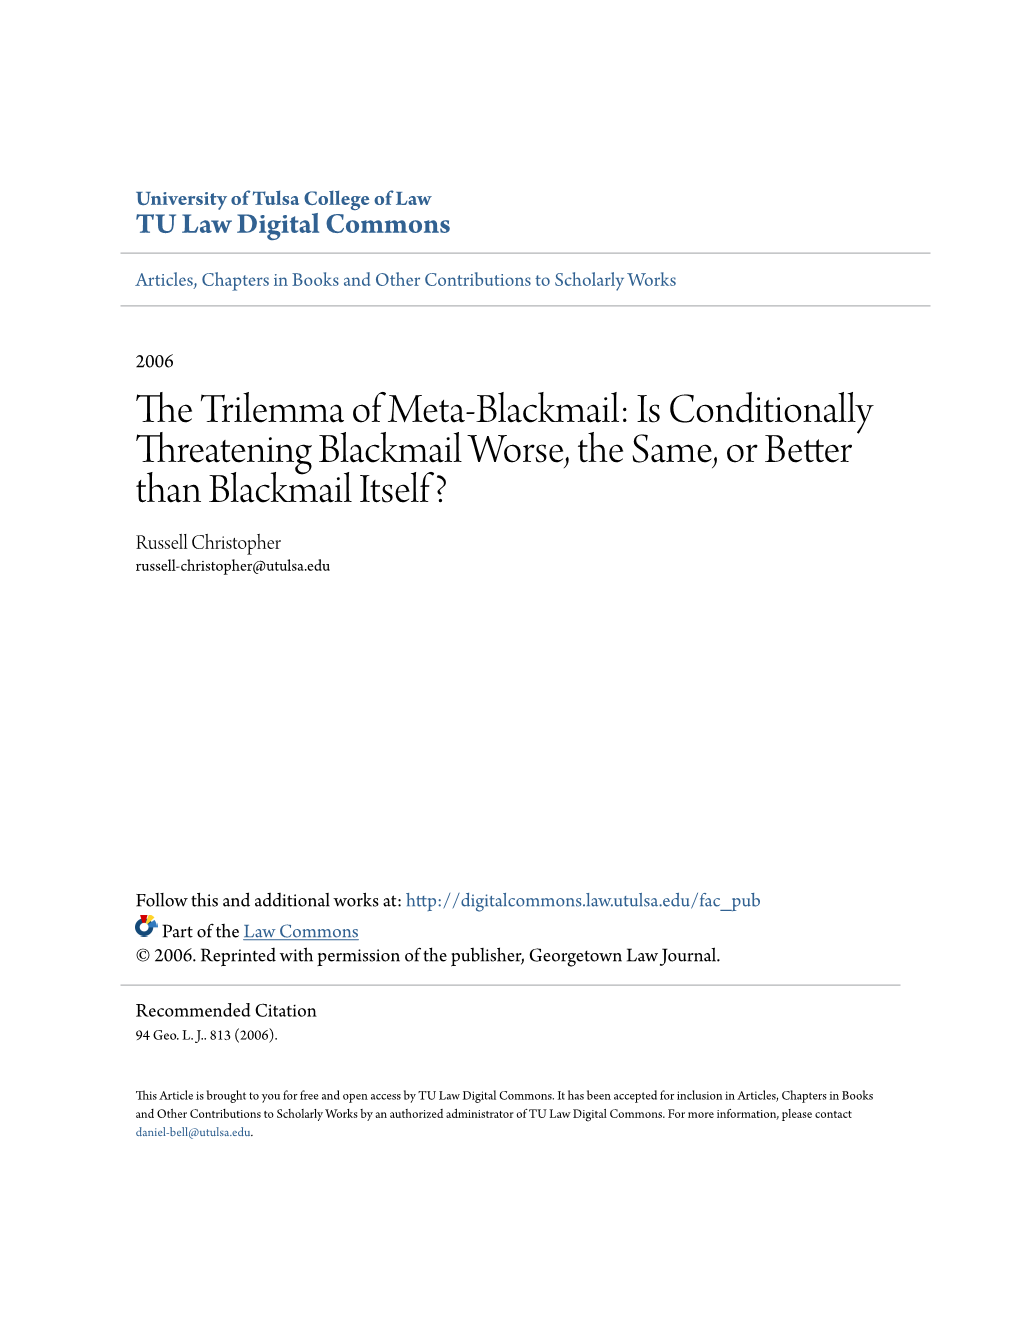 The Trilemma of Meta-Blackmail: Is Conditionally Threatening Blackmail Worse, the Same, Or Better Than Blackmail Itself?